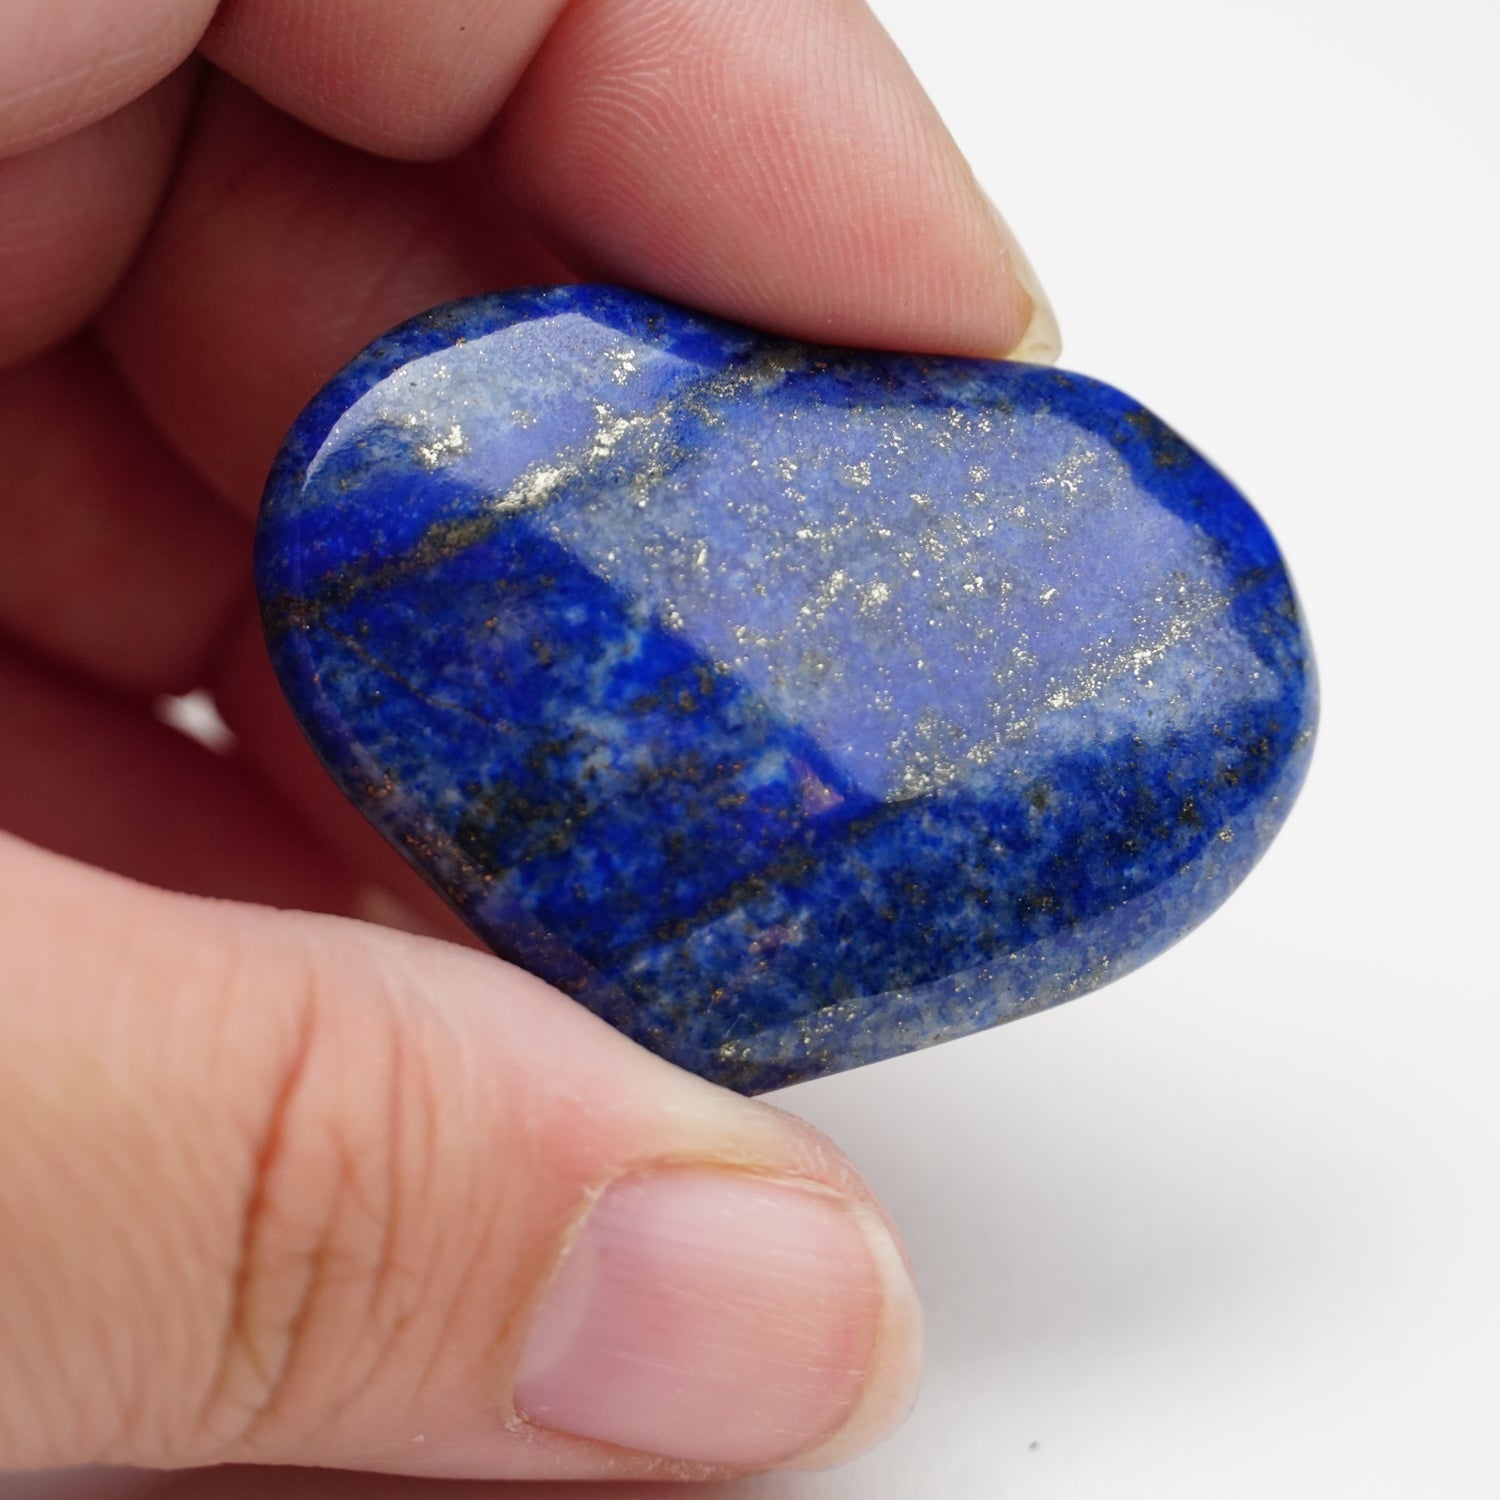 Polished Lapis Lazuli Heart from Afghanistan (23 grams)